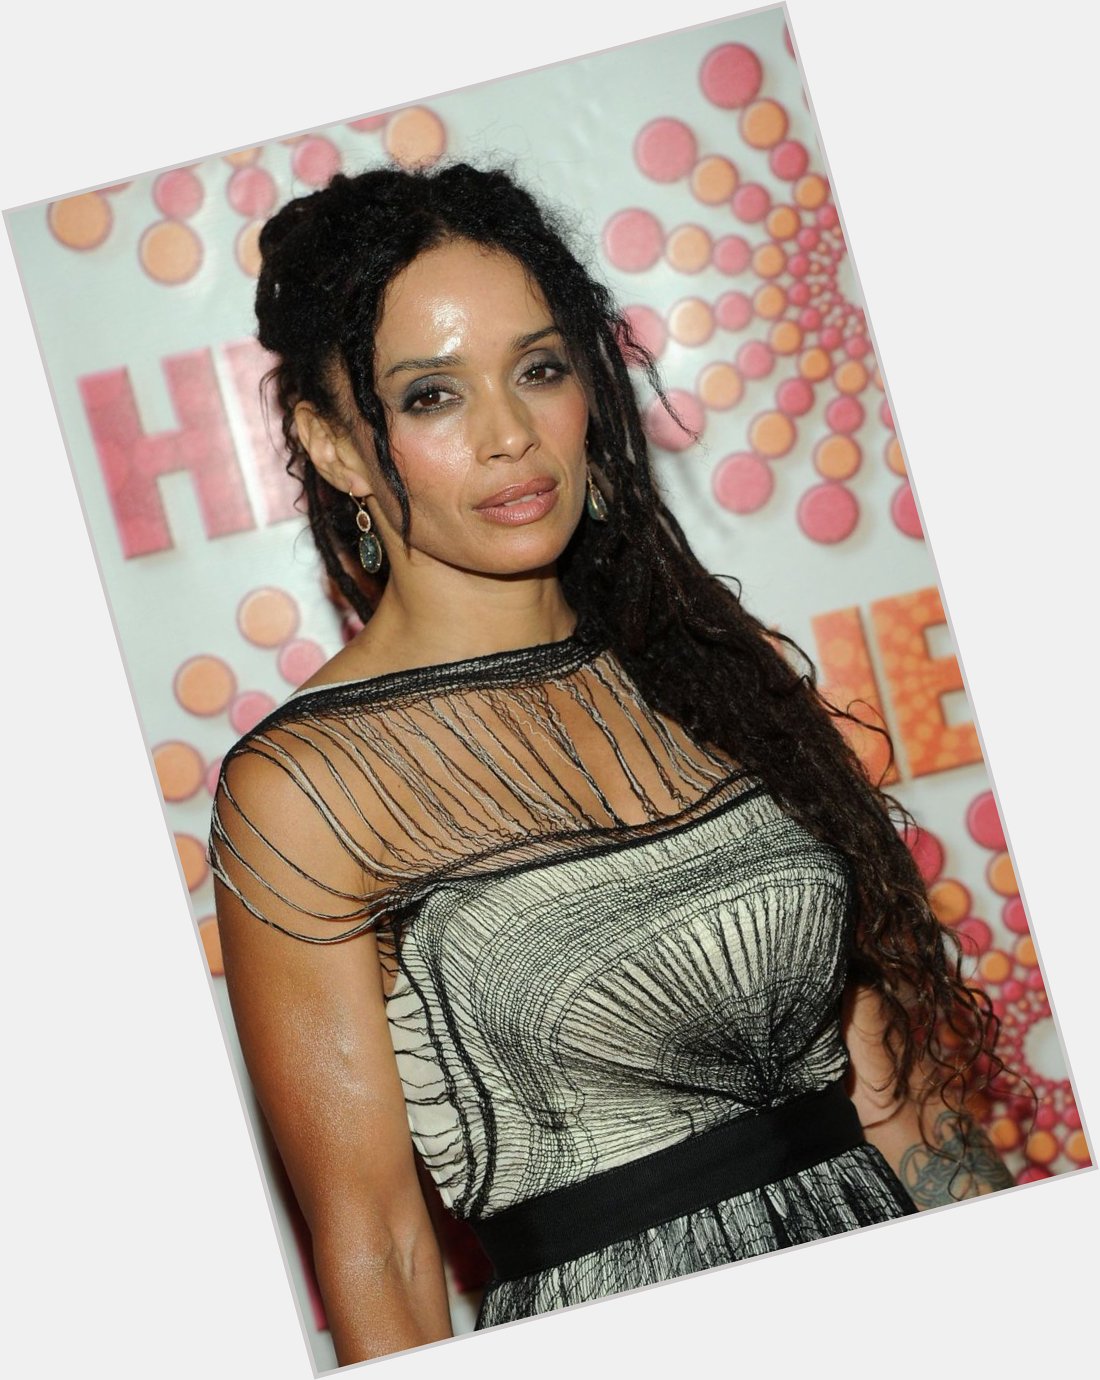 Happy birthday to actress Lisa Bonet who turns 47 years old today 